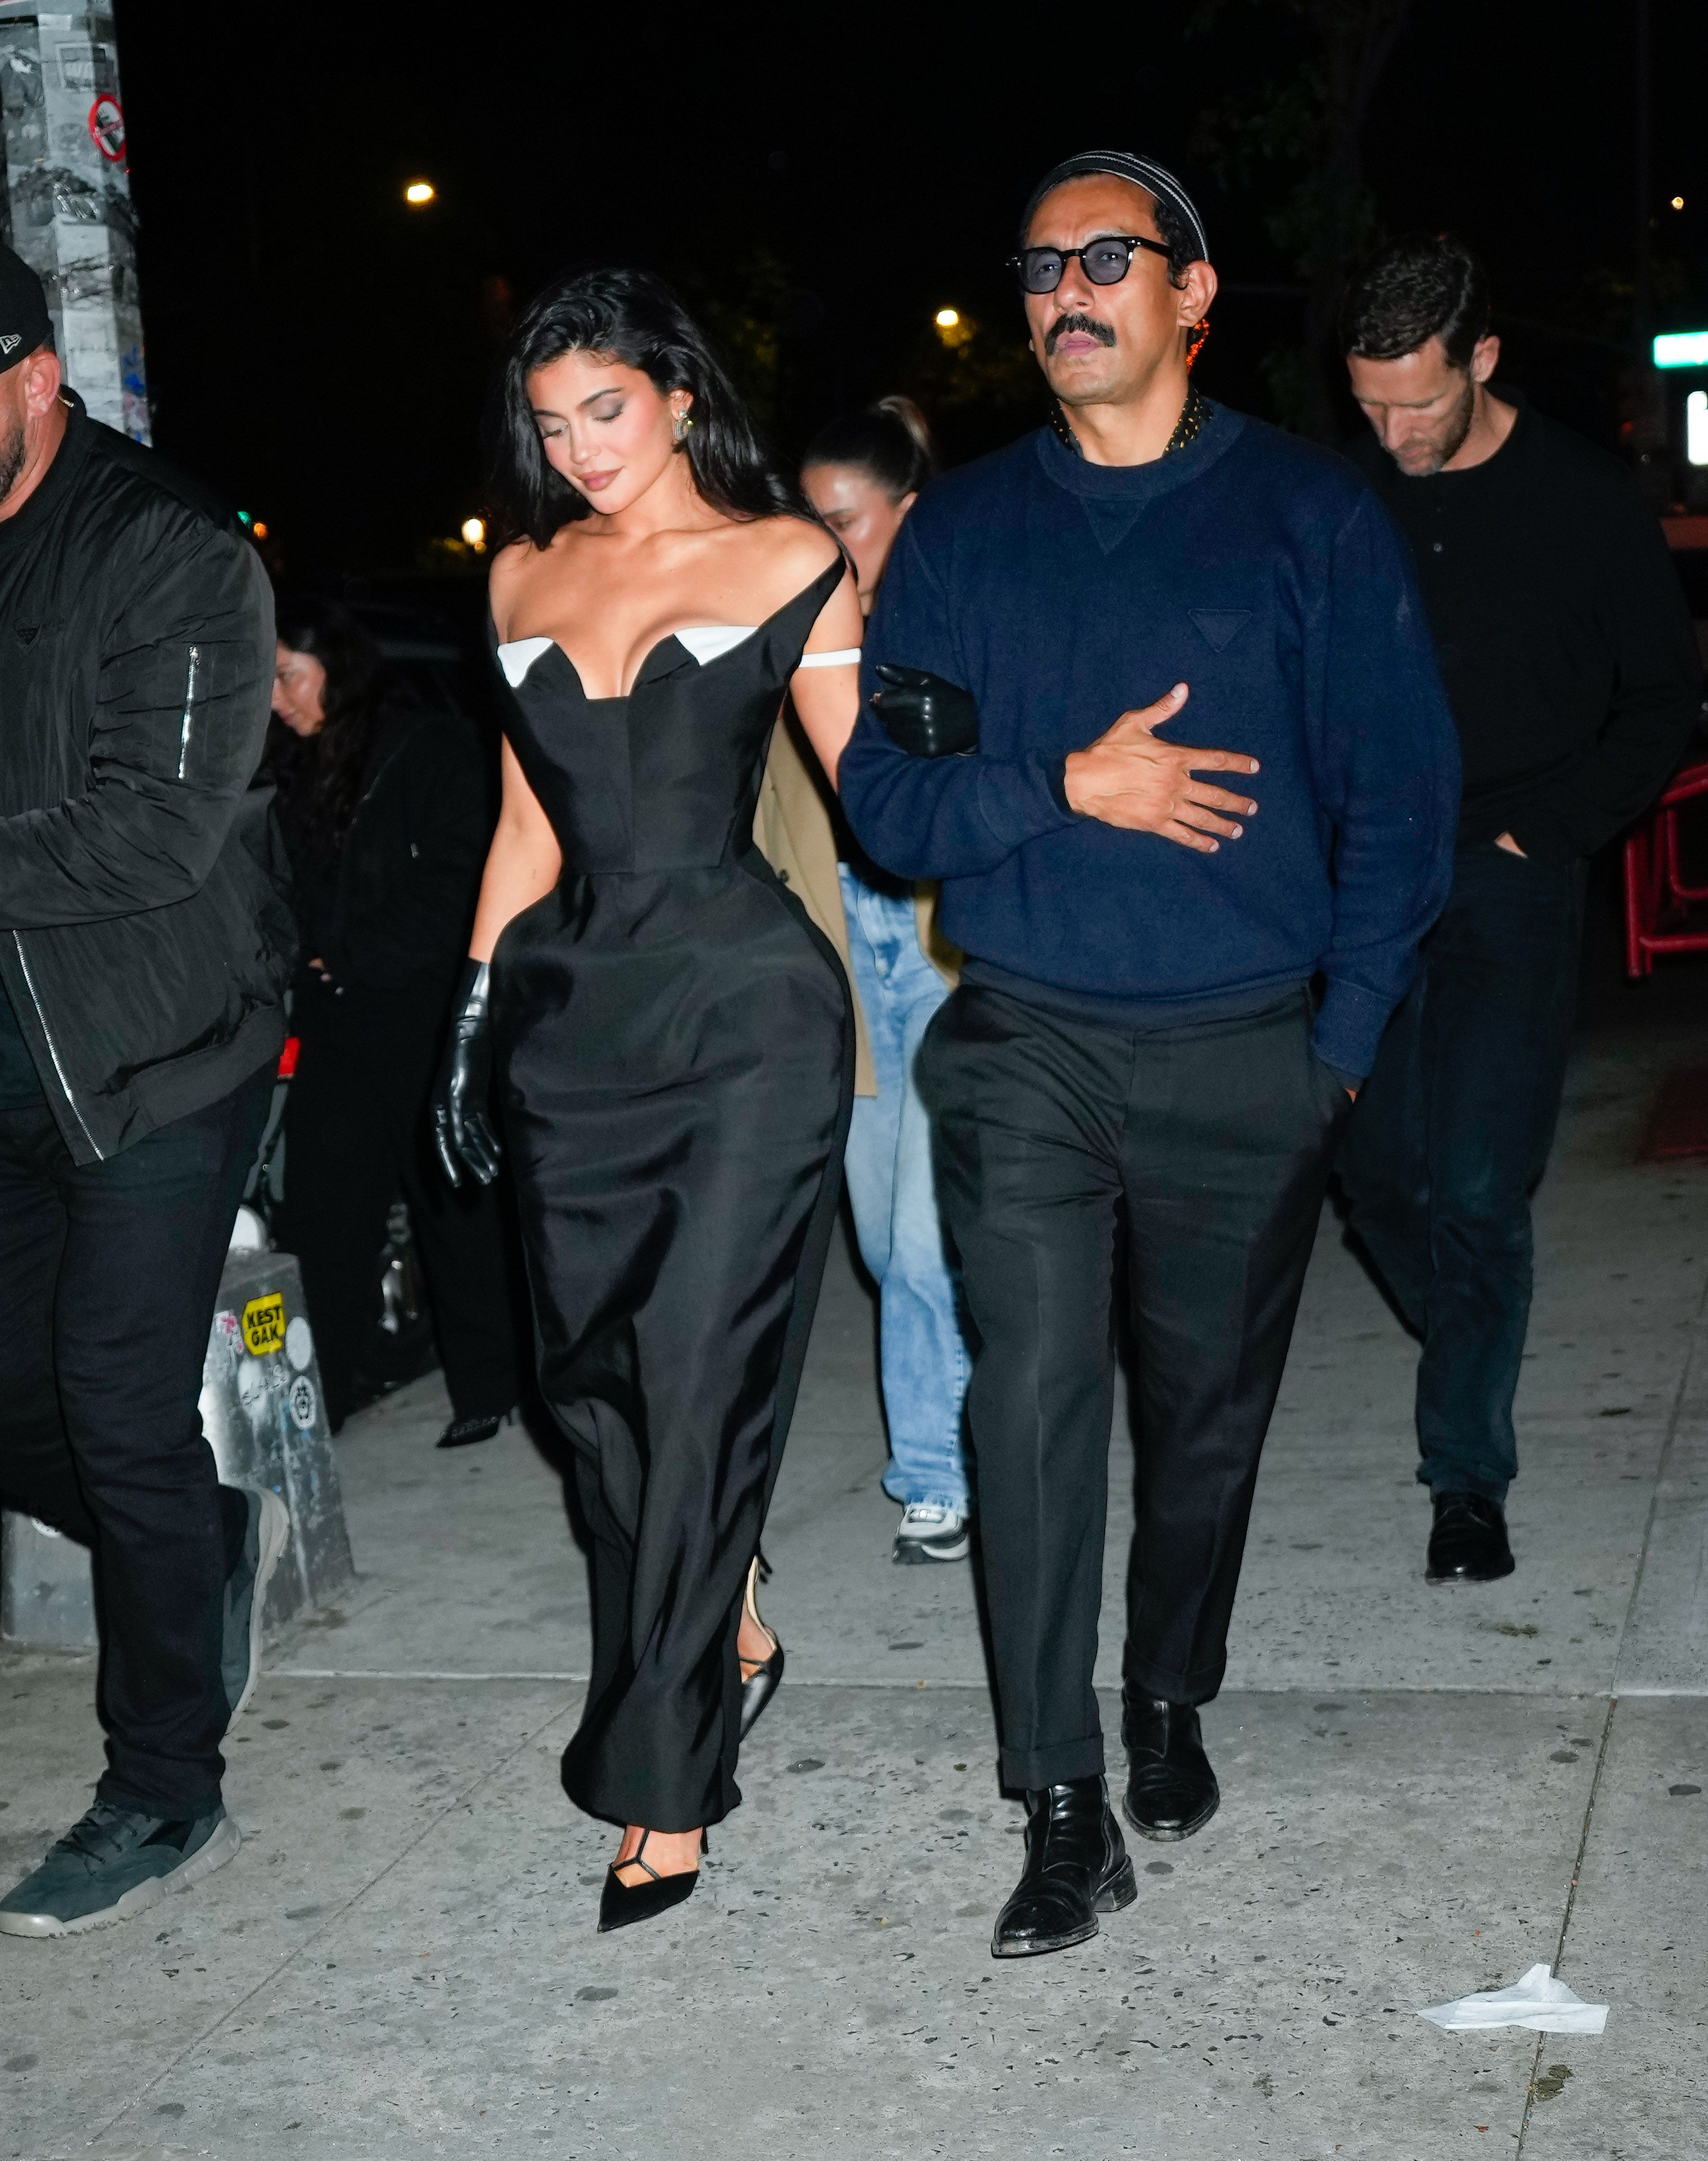 Kylie Jenner & Selena Gomez Reunited At The Met Gala After A Long,  Confusing History — PHOTO